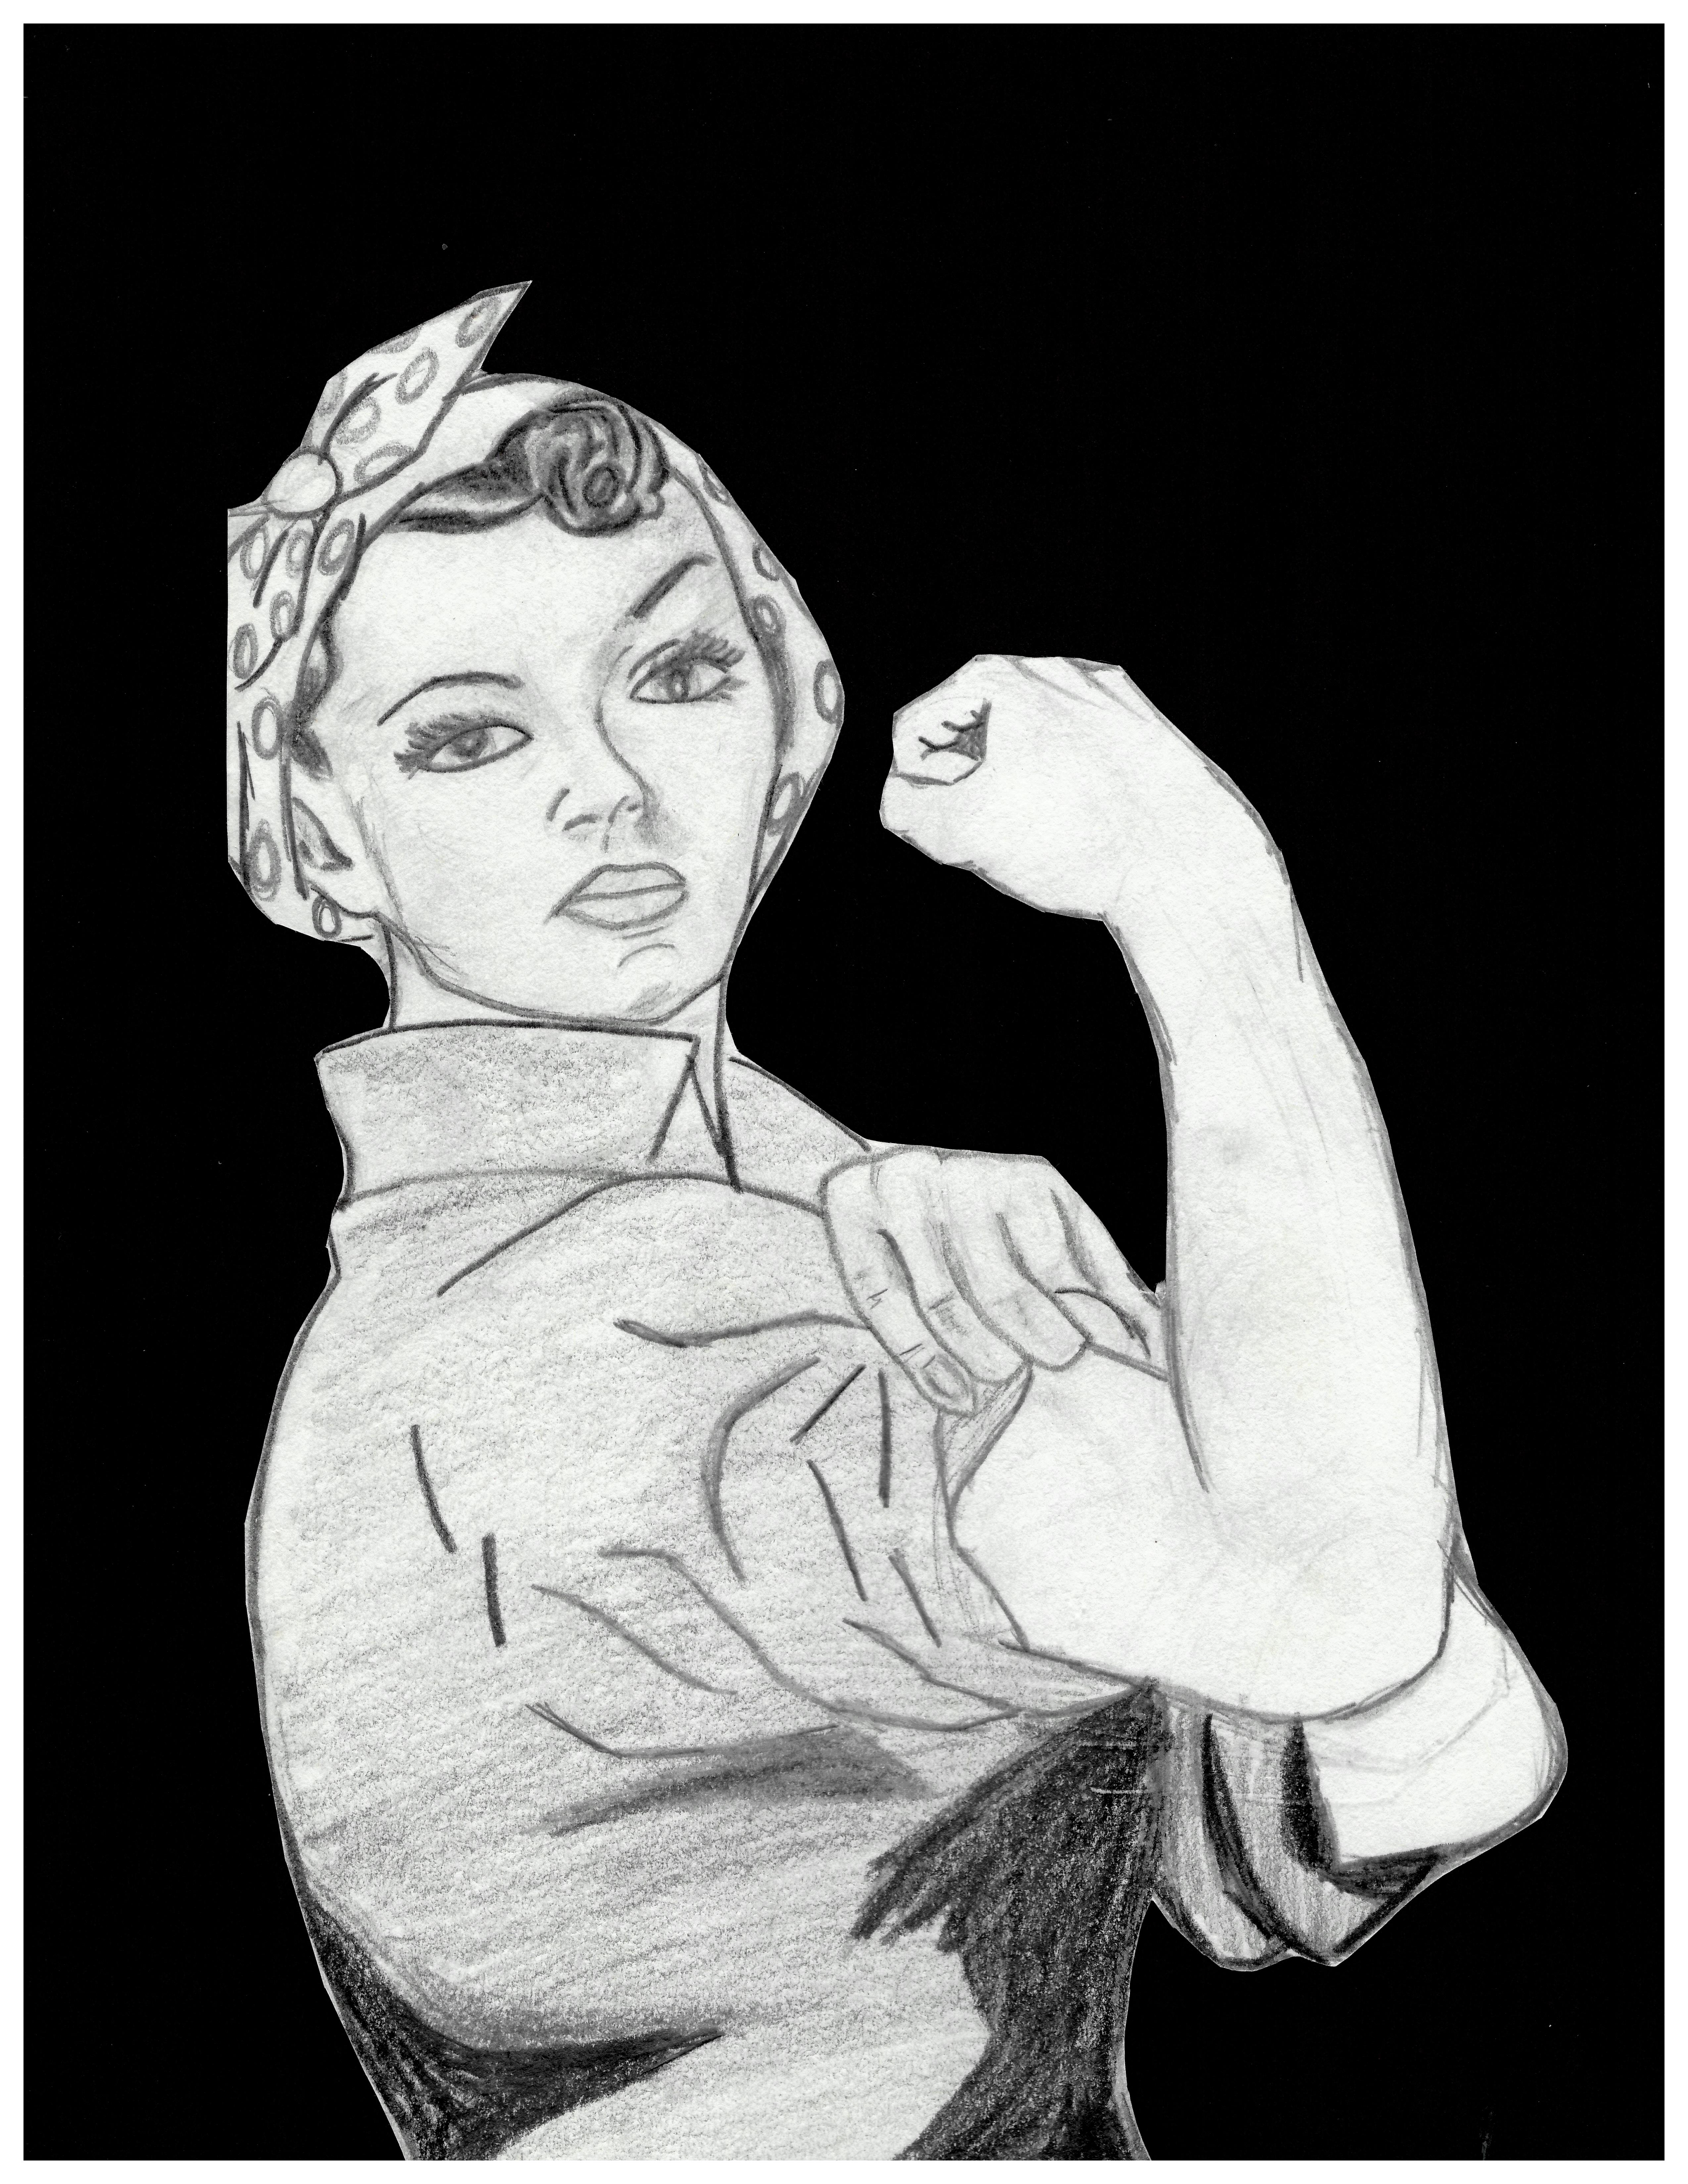 Rosie the Riveter in black and white